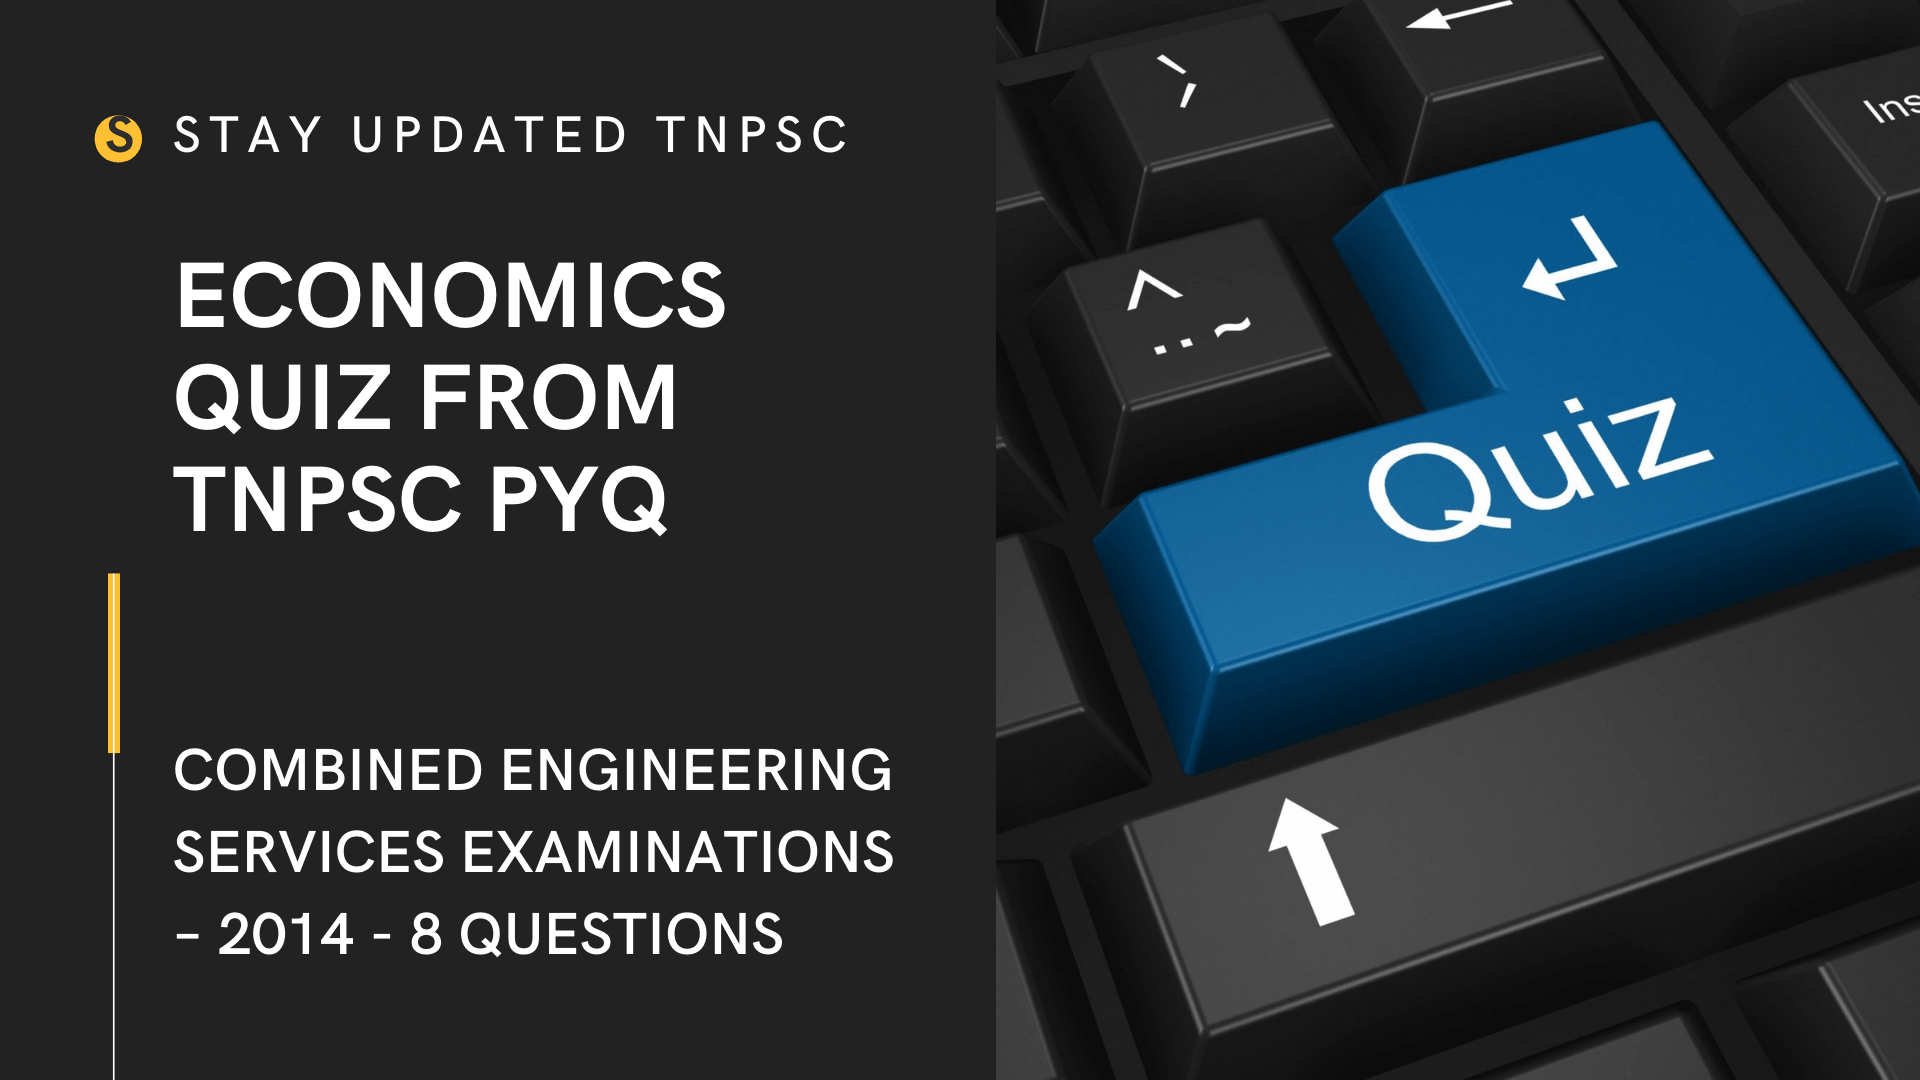 ECONOMICS QUESTIONS FROM TNPSC PREVIOUS YEAR QUESTION PAPER IN BOTH TAMIL AND ENGLISH